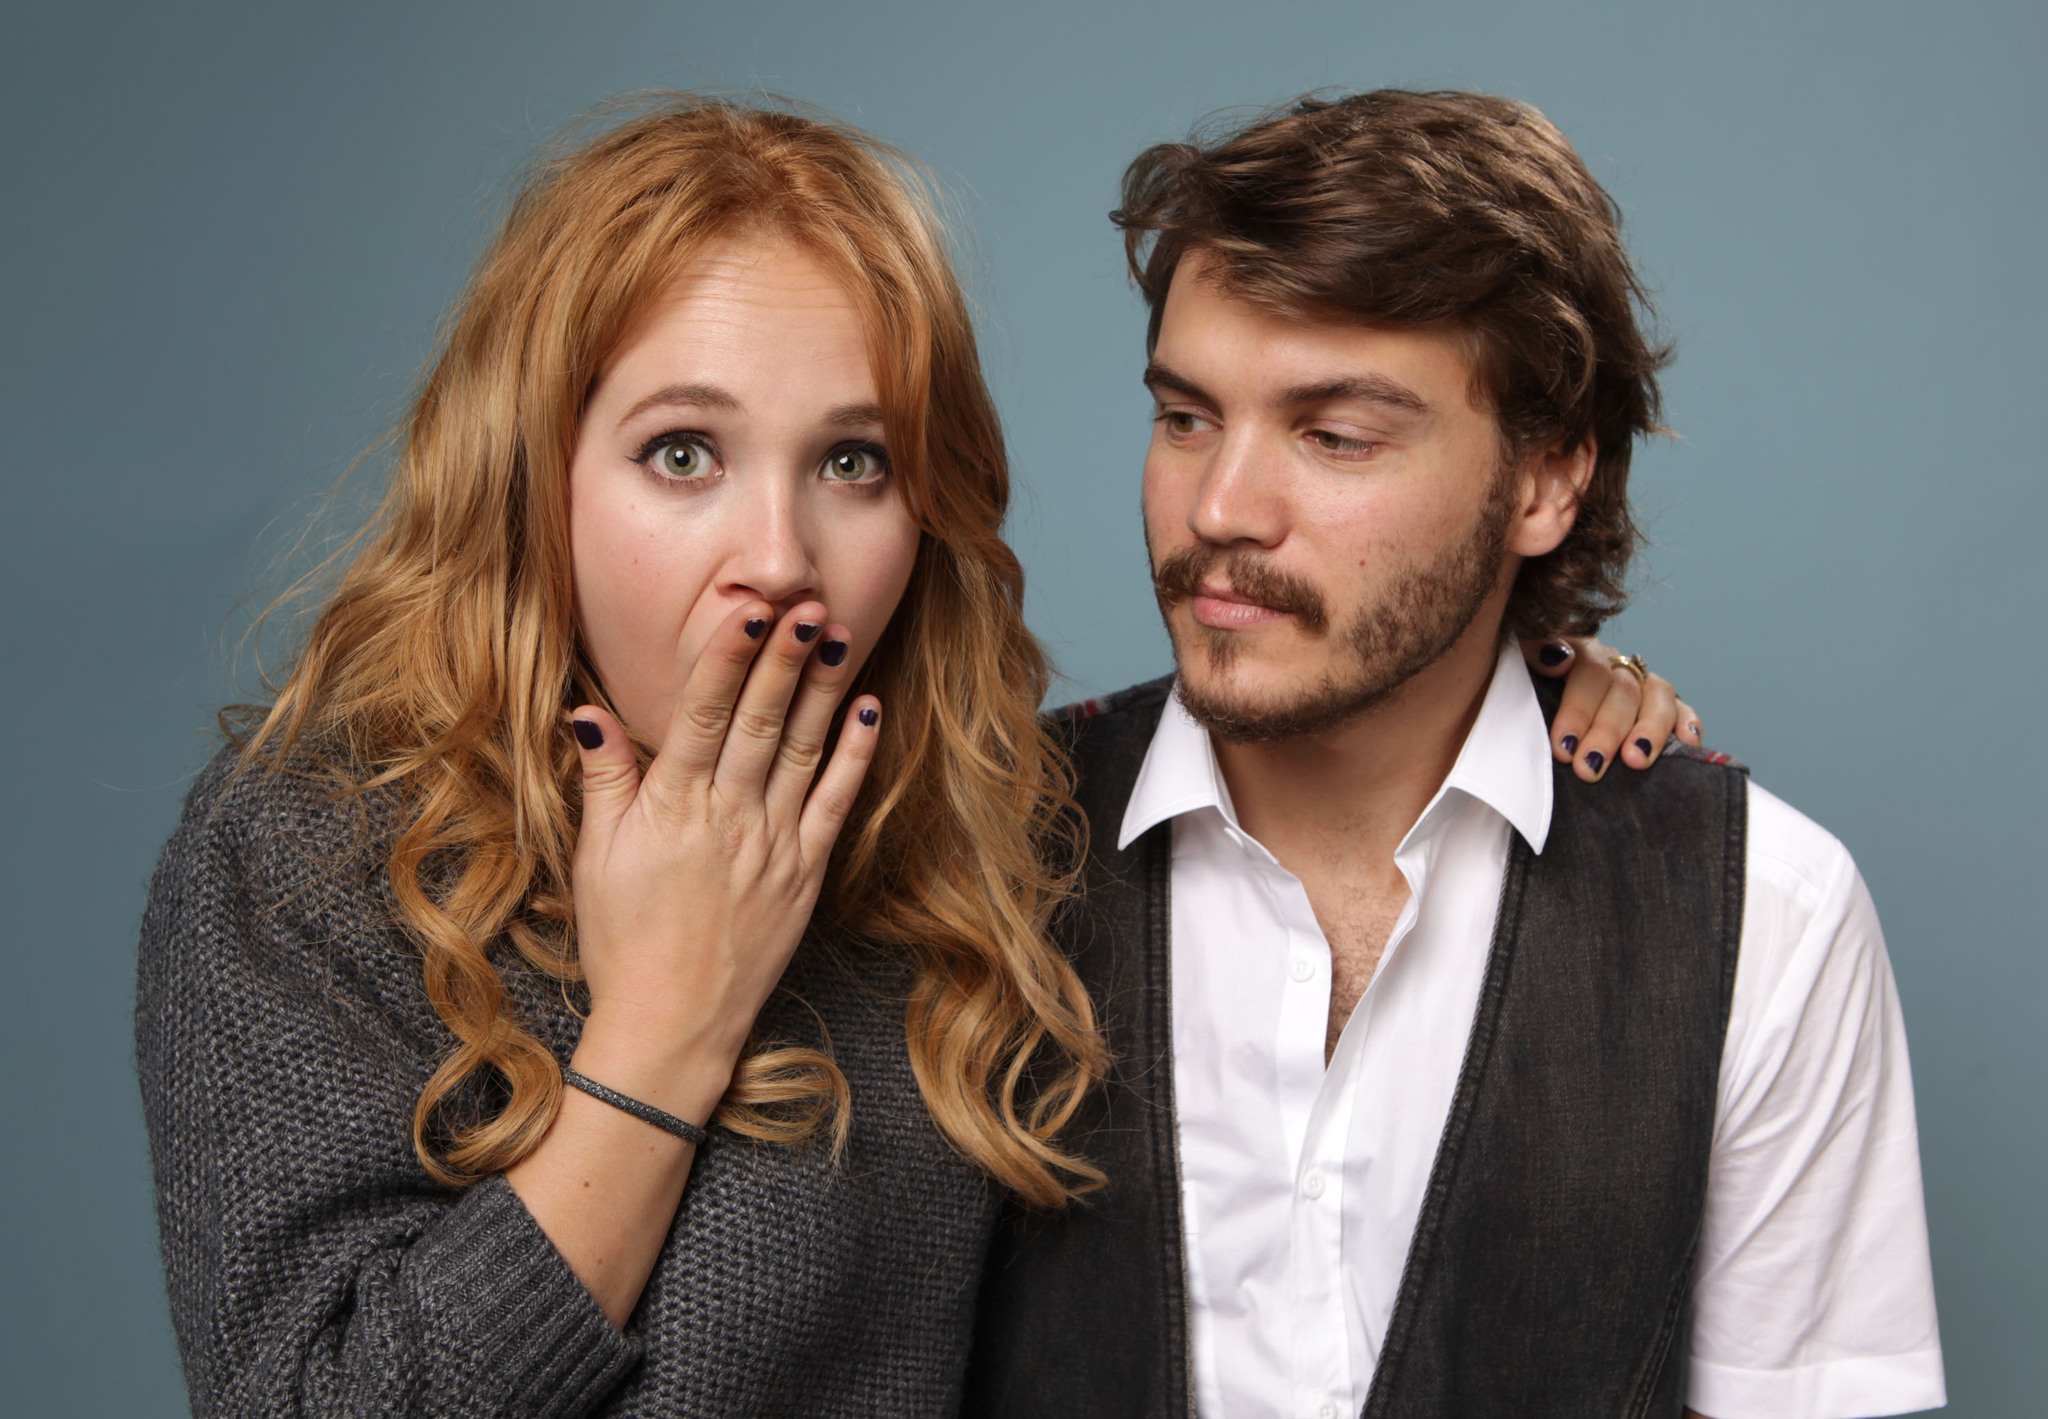 Emile Hirsch and Juno Temple